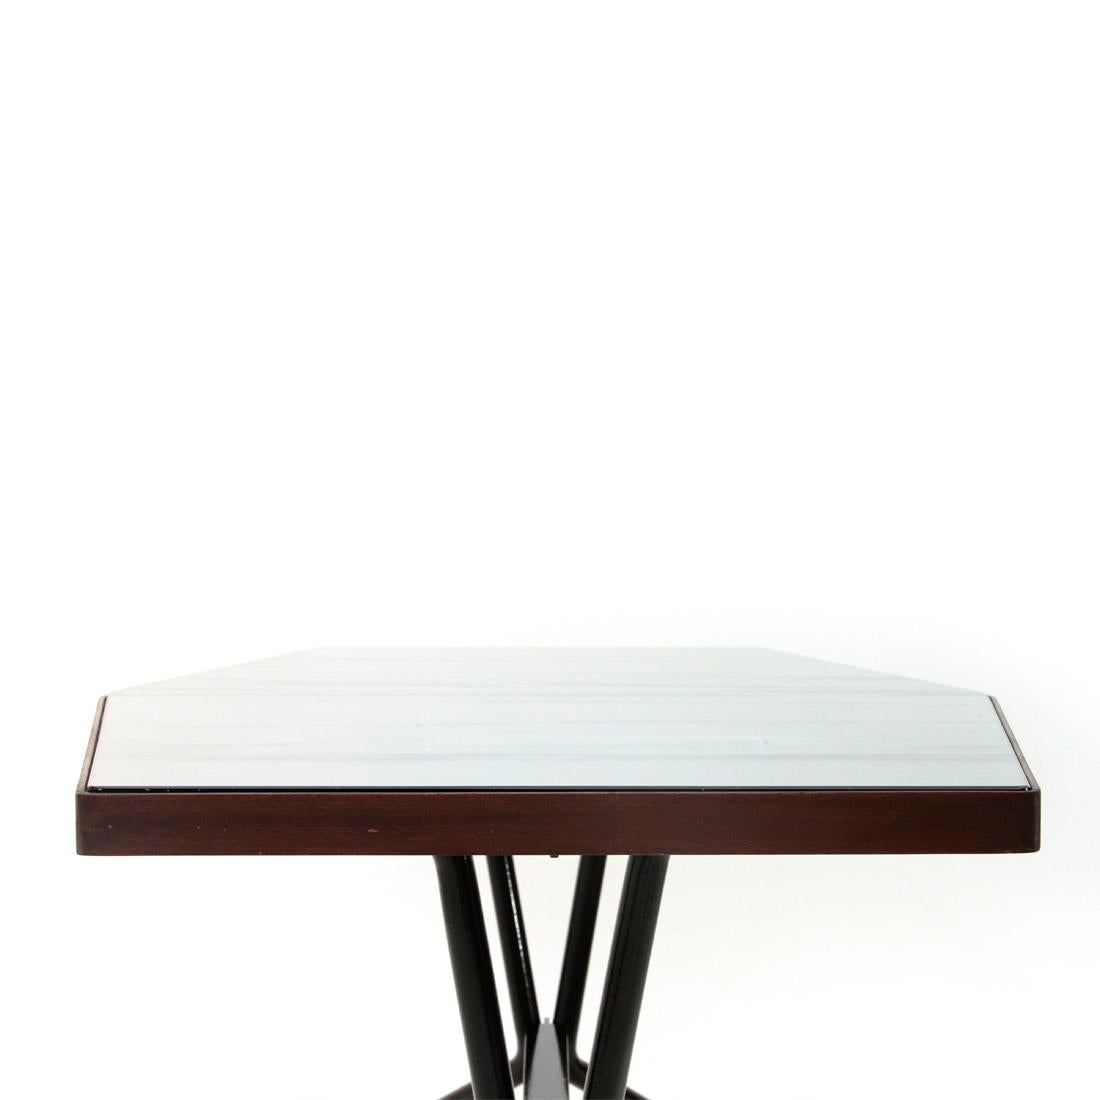 Mid-Century Modern Table with Teak and Glass Top, 1950s